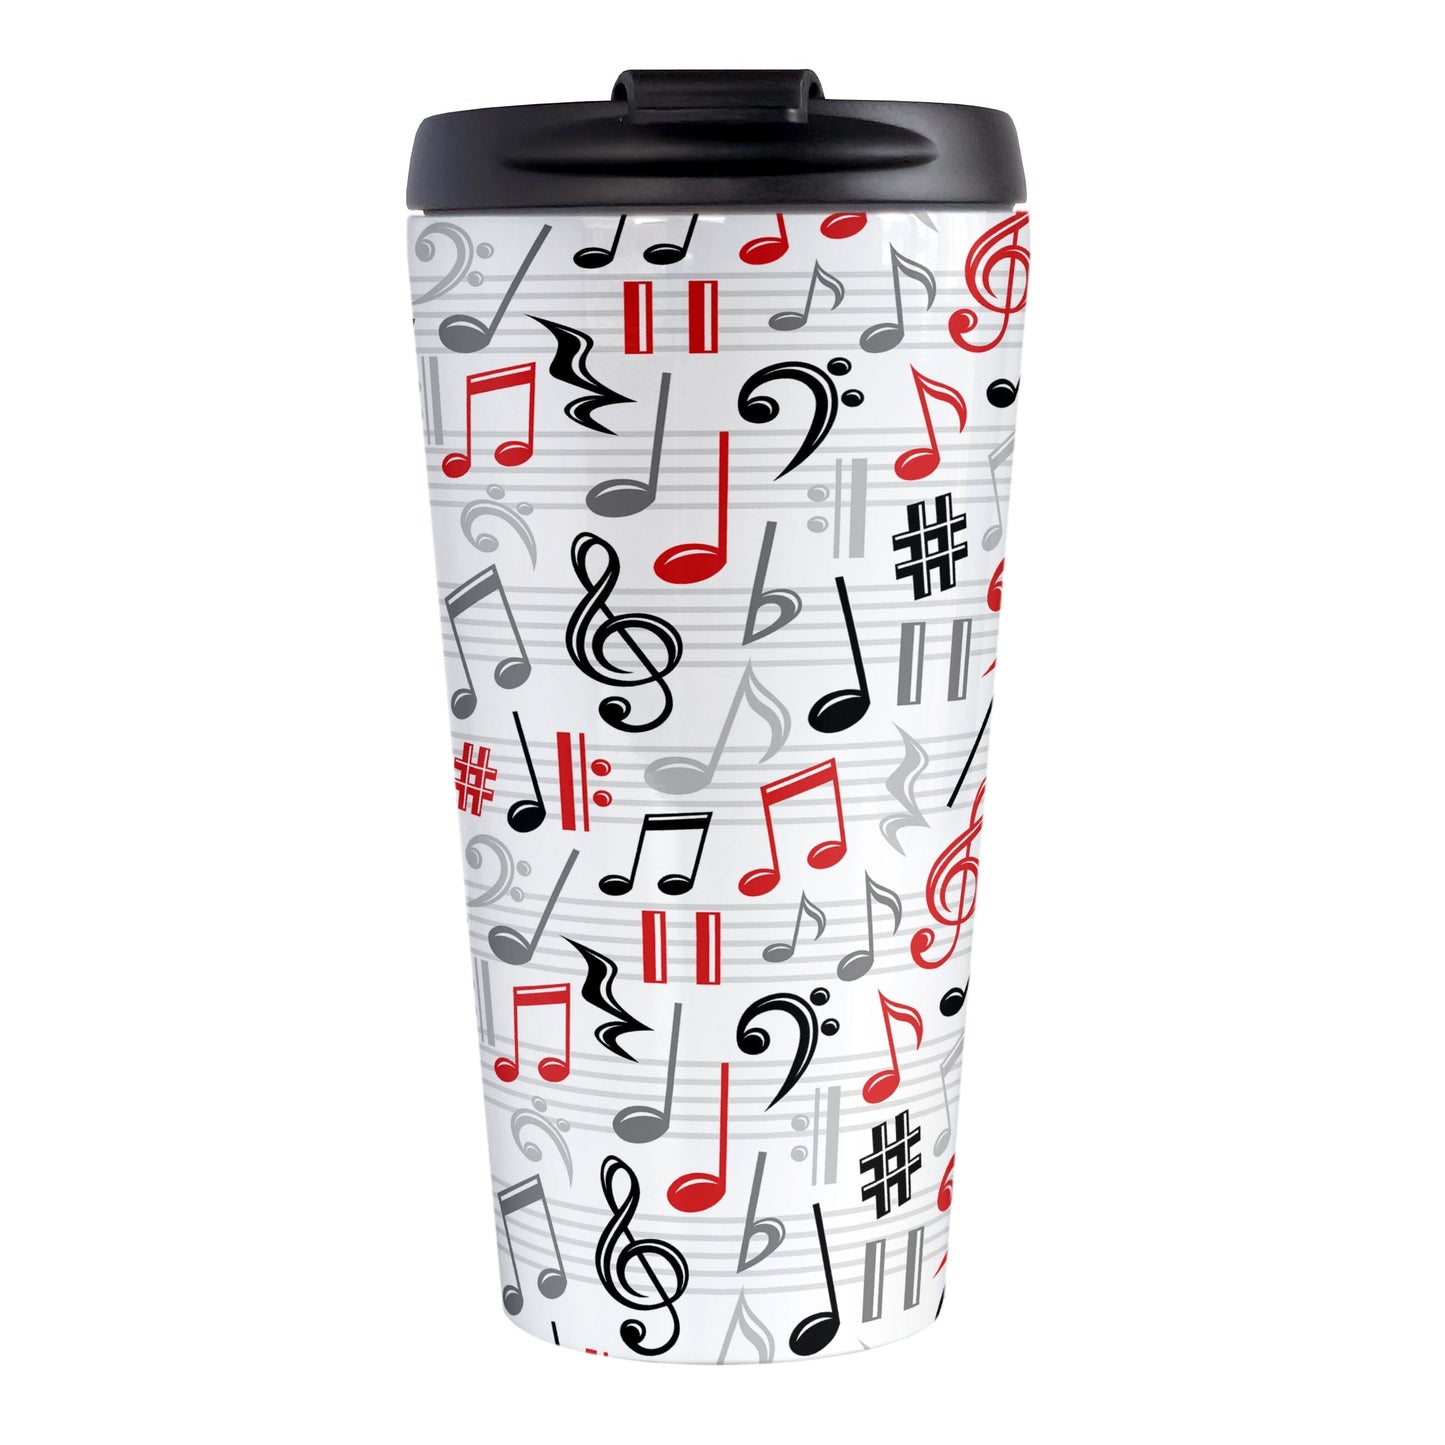 Red Music Notes Pattern Travel Mug (15oz) at Amy's Coffee Mugs. A stainless steel travel mug designed with music notes and symbols in red, black, and gray in a pattern that wraps around the travel mug.